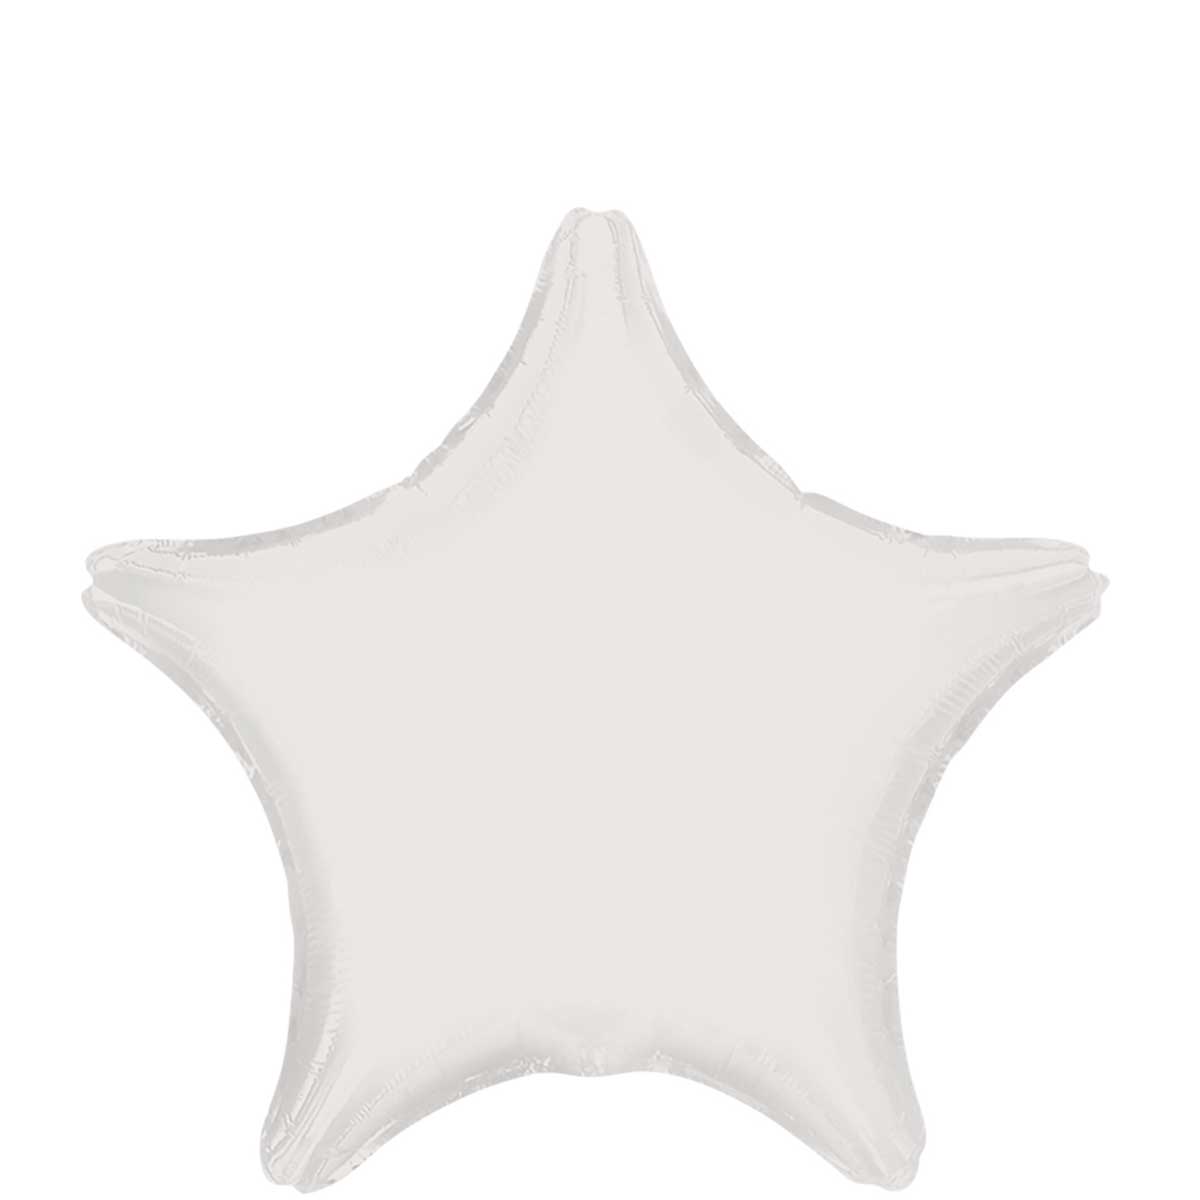 Metallic White Star Foil Balloon 19in Balloons & Streamers - Party Centre